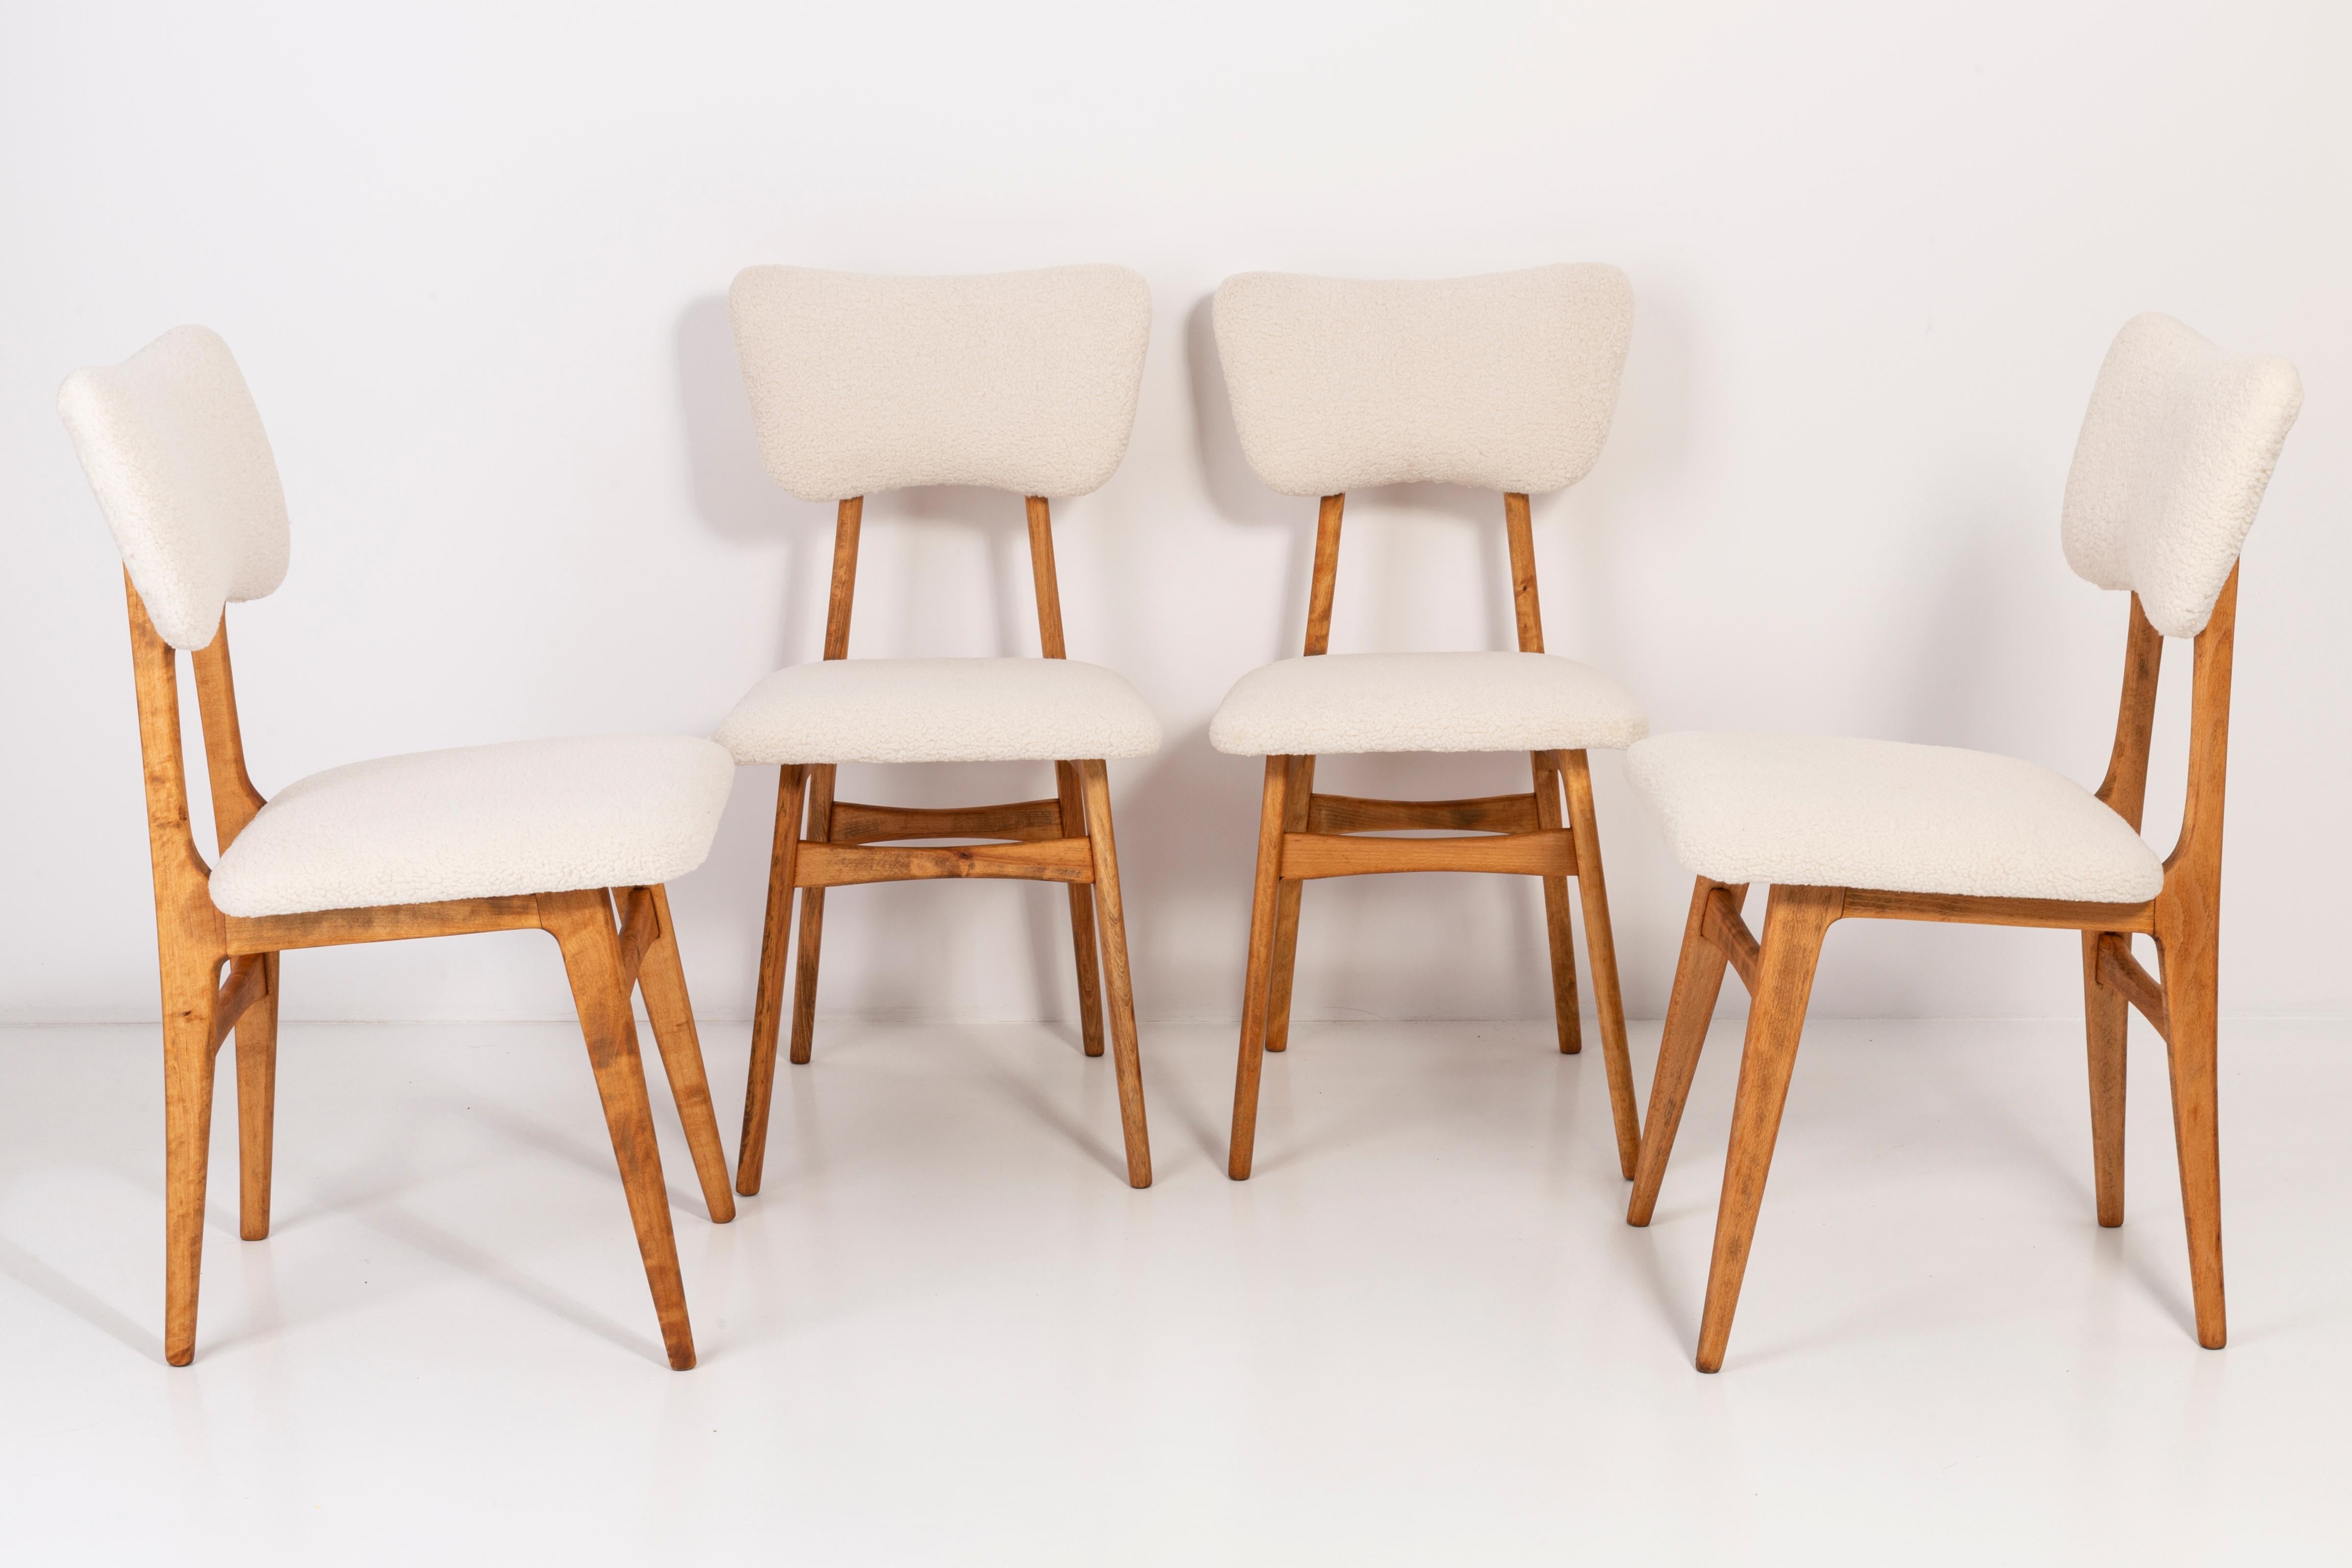 Chairs designed by Prof. Rajmund Halas. Made of beechwood. Chair is after a complete upholstery renovation, the woodwork has been refreshed. Seat and back is dressed in crème, durable and pleasant to the touch bouclé fabric. Chair is stabile and